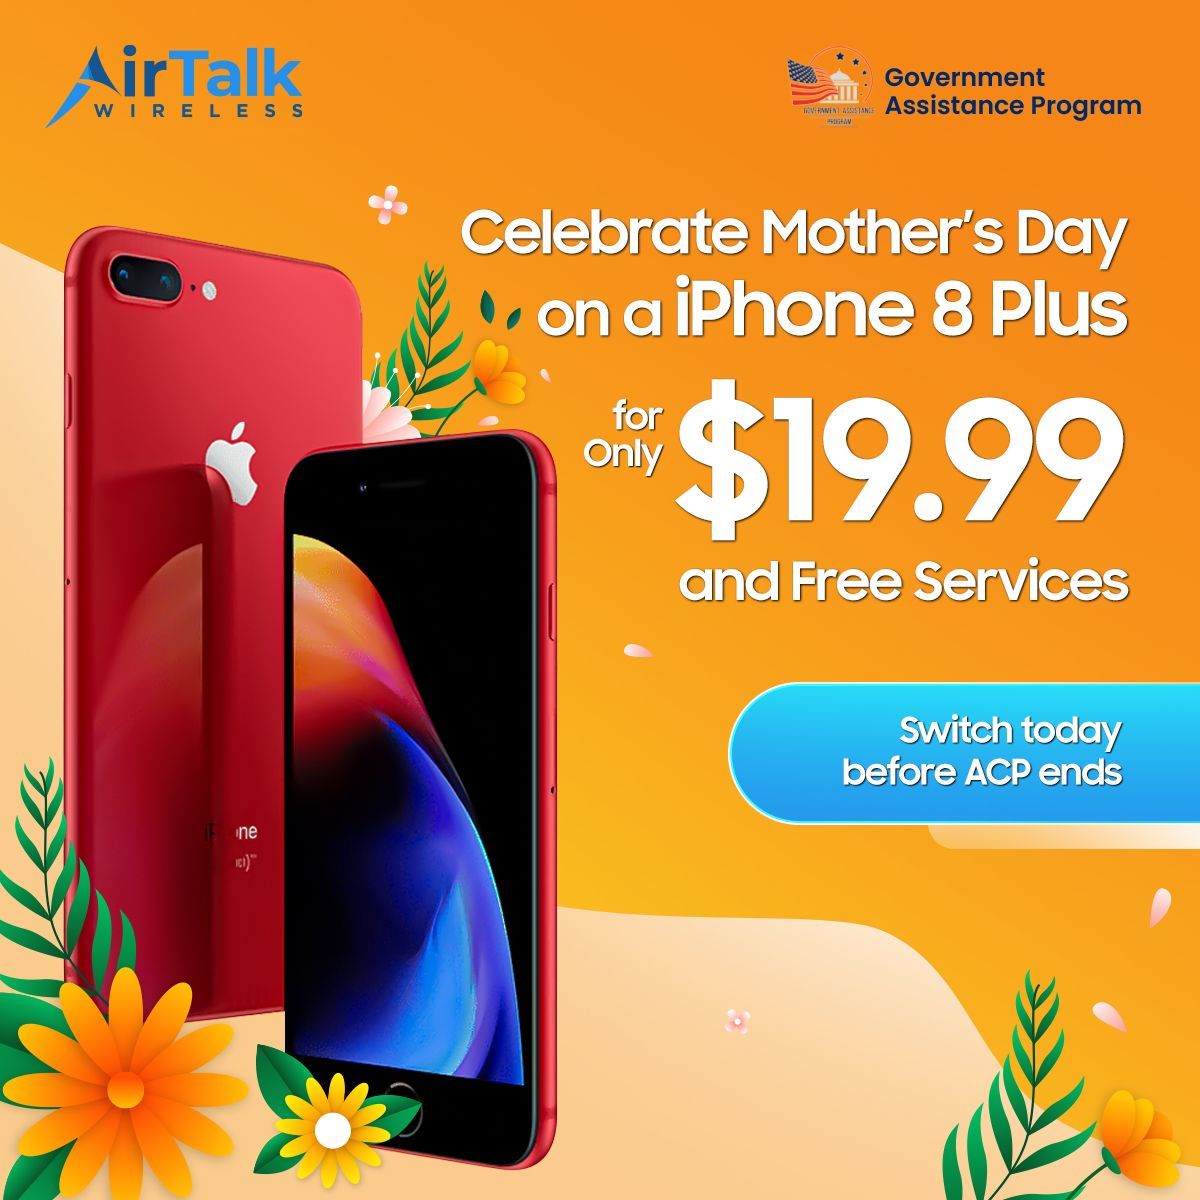 🌸 Happy Mother's Day from AirTalk Wireless! 🌸  
 
Treat Mom to the gift of savings by switching to our FREE services today. 
 
Don't wait - make her day extra special with seamless connectivity! 📱💝  
 
#MothersDay #SwitchToAirTalk #StayConnected